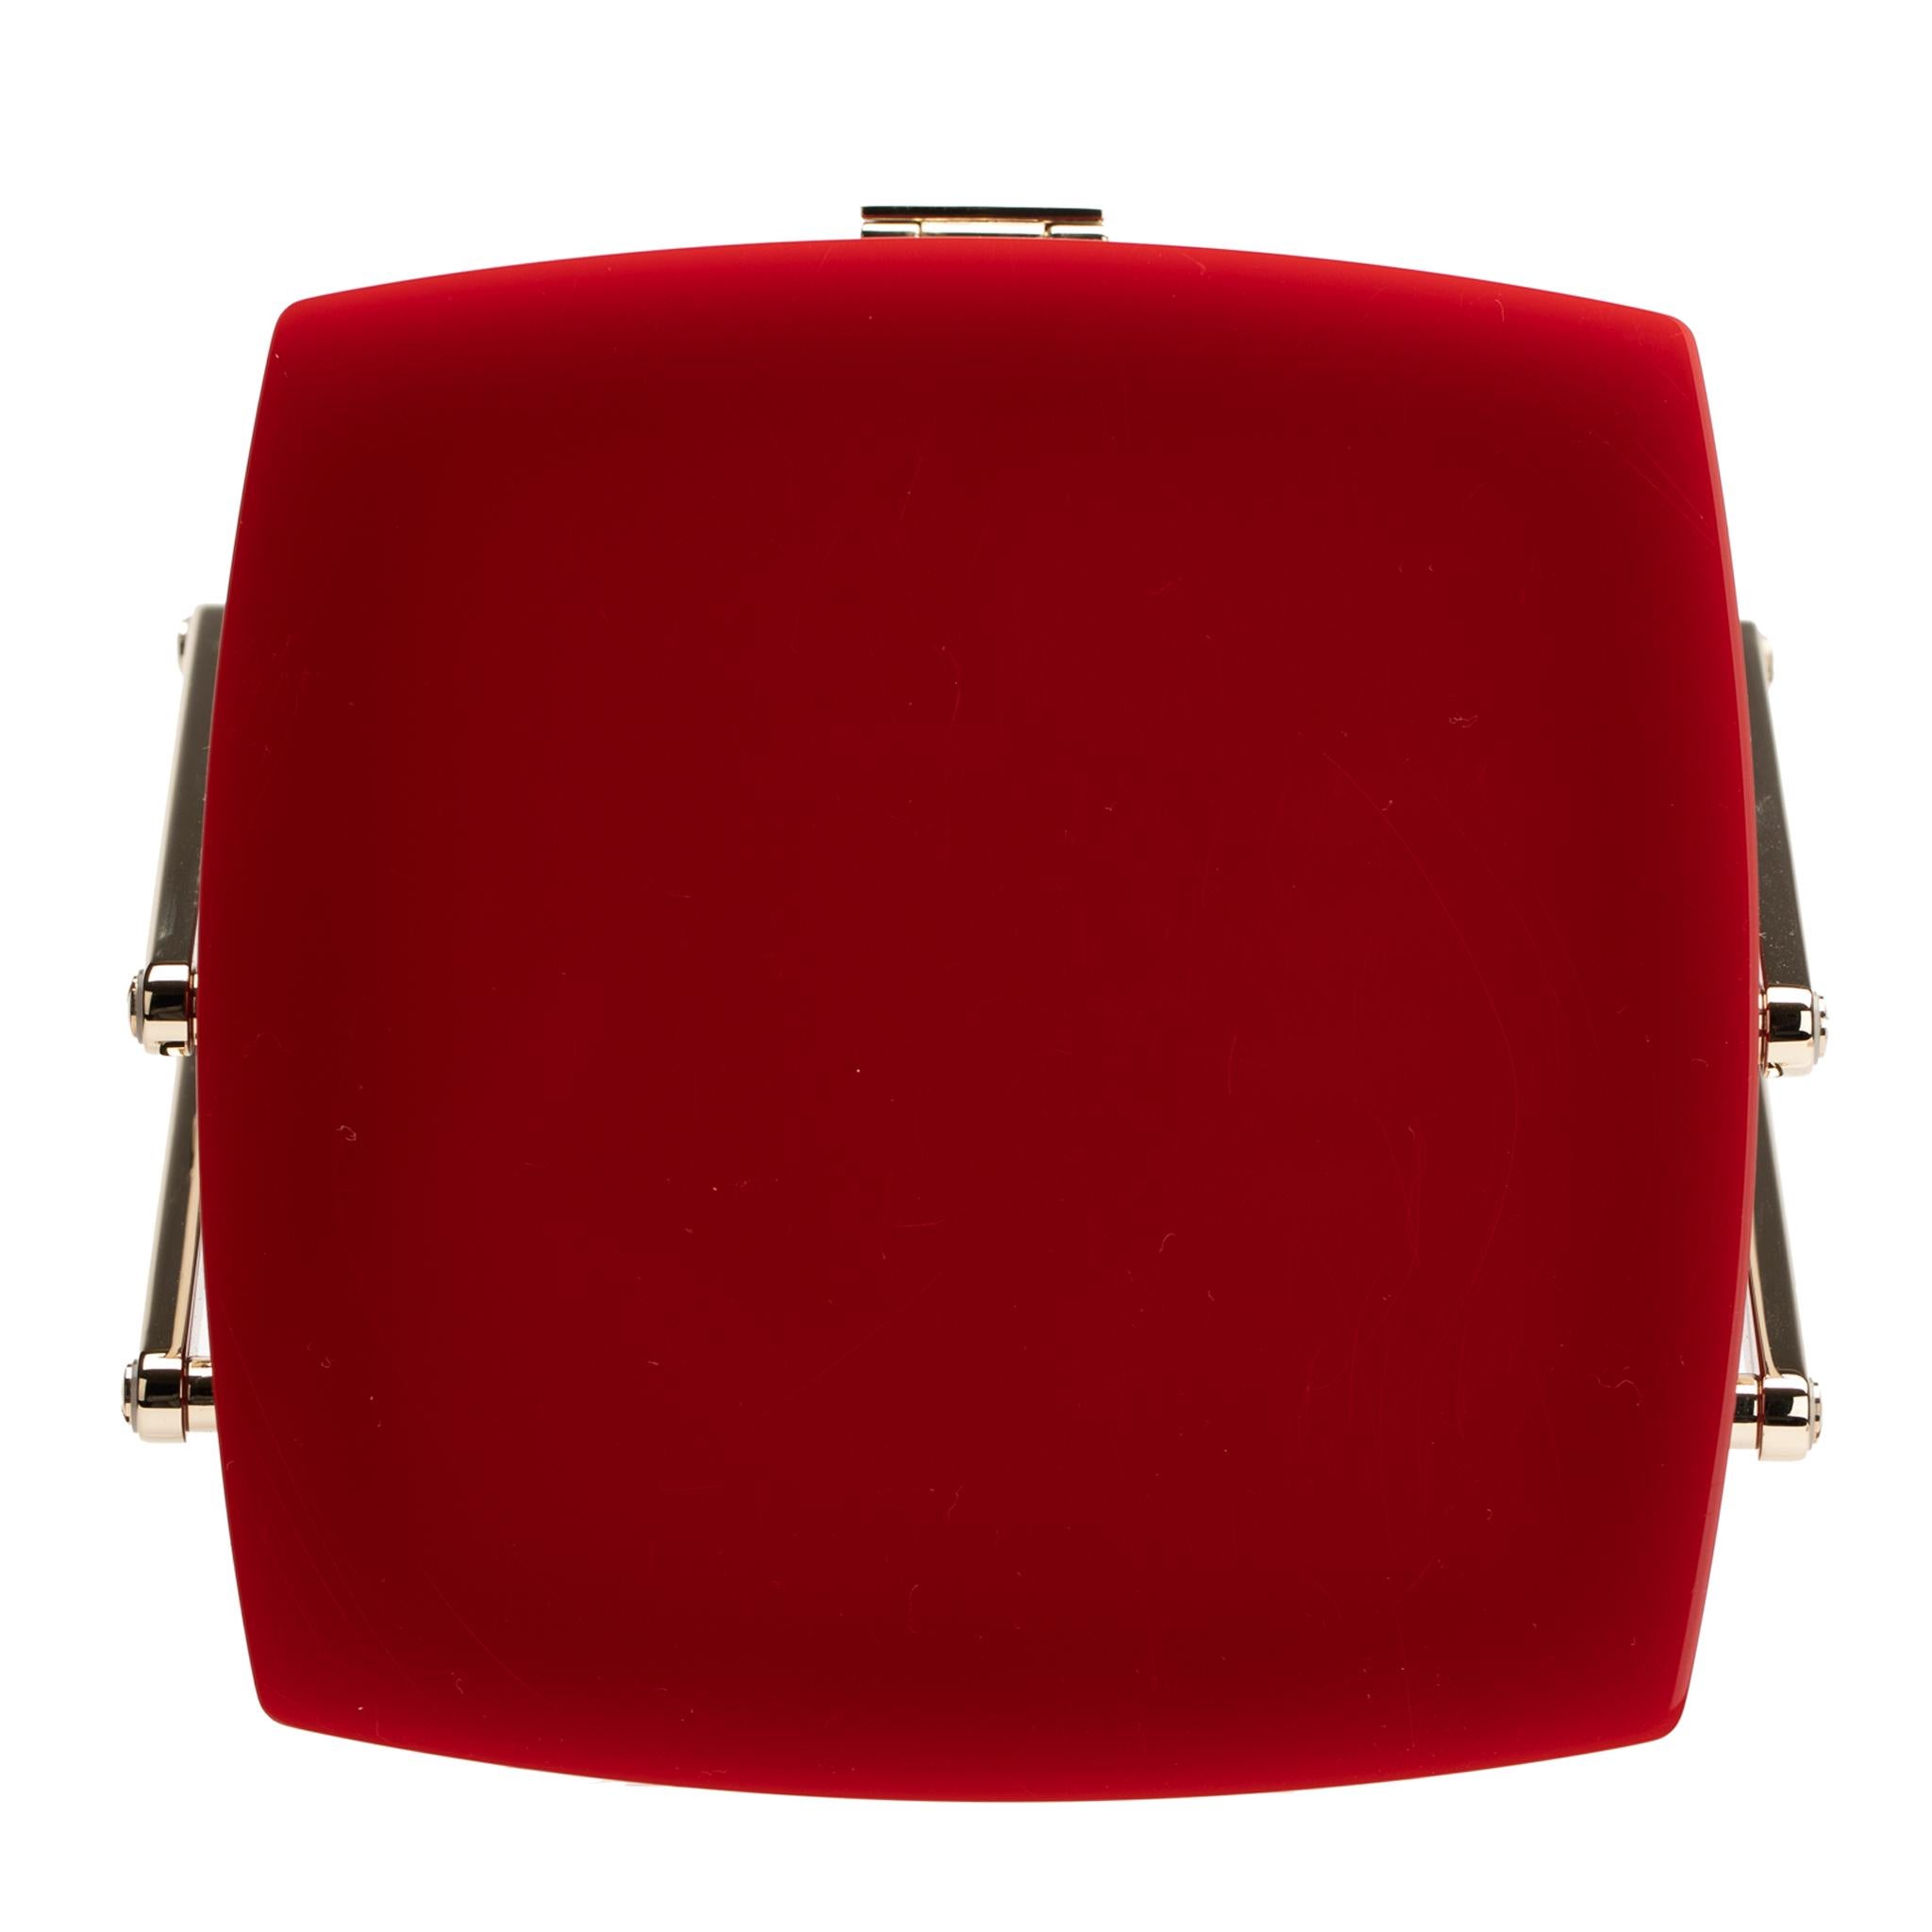 This stunning vanity case takes inspiration for Chanel’s classic leather vanity cases. Skilfully designed in a rich red lucite, complemented by light gold-tone hardware, this limited edition vanity case opens to reveal a mirror and a two-tier